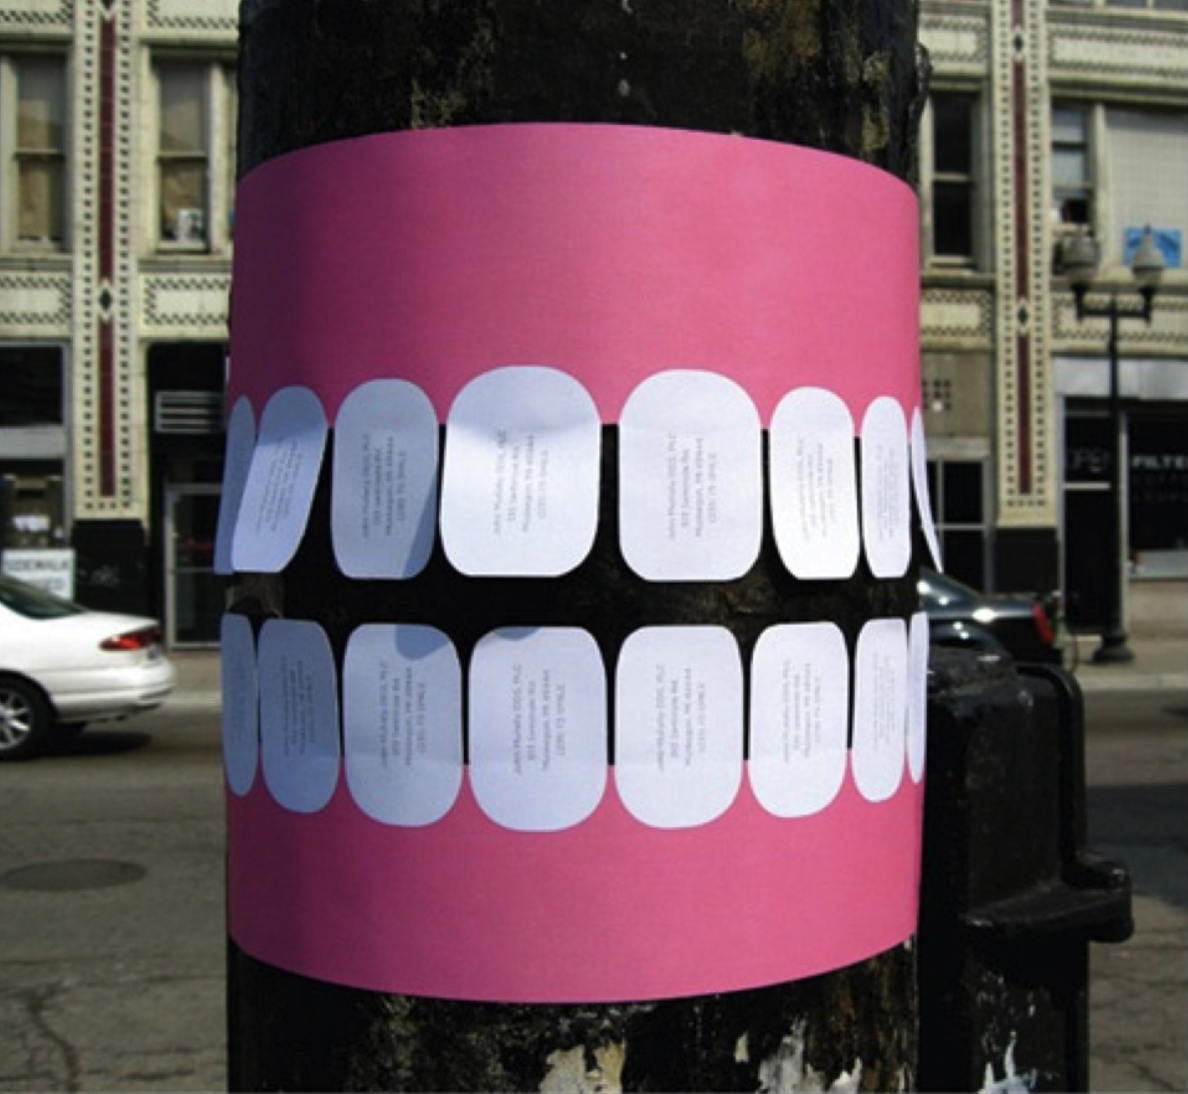 A dental ambient encourages people to call their dentist back